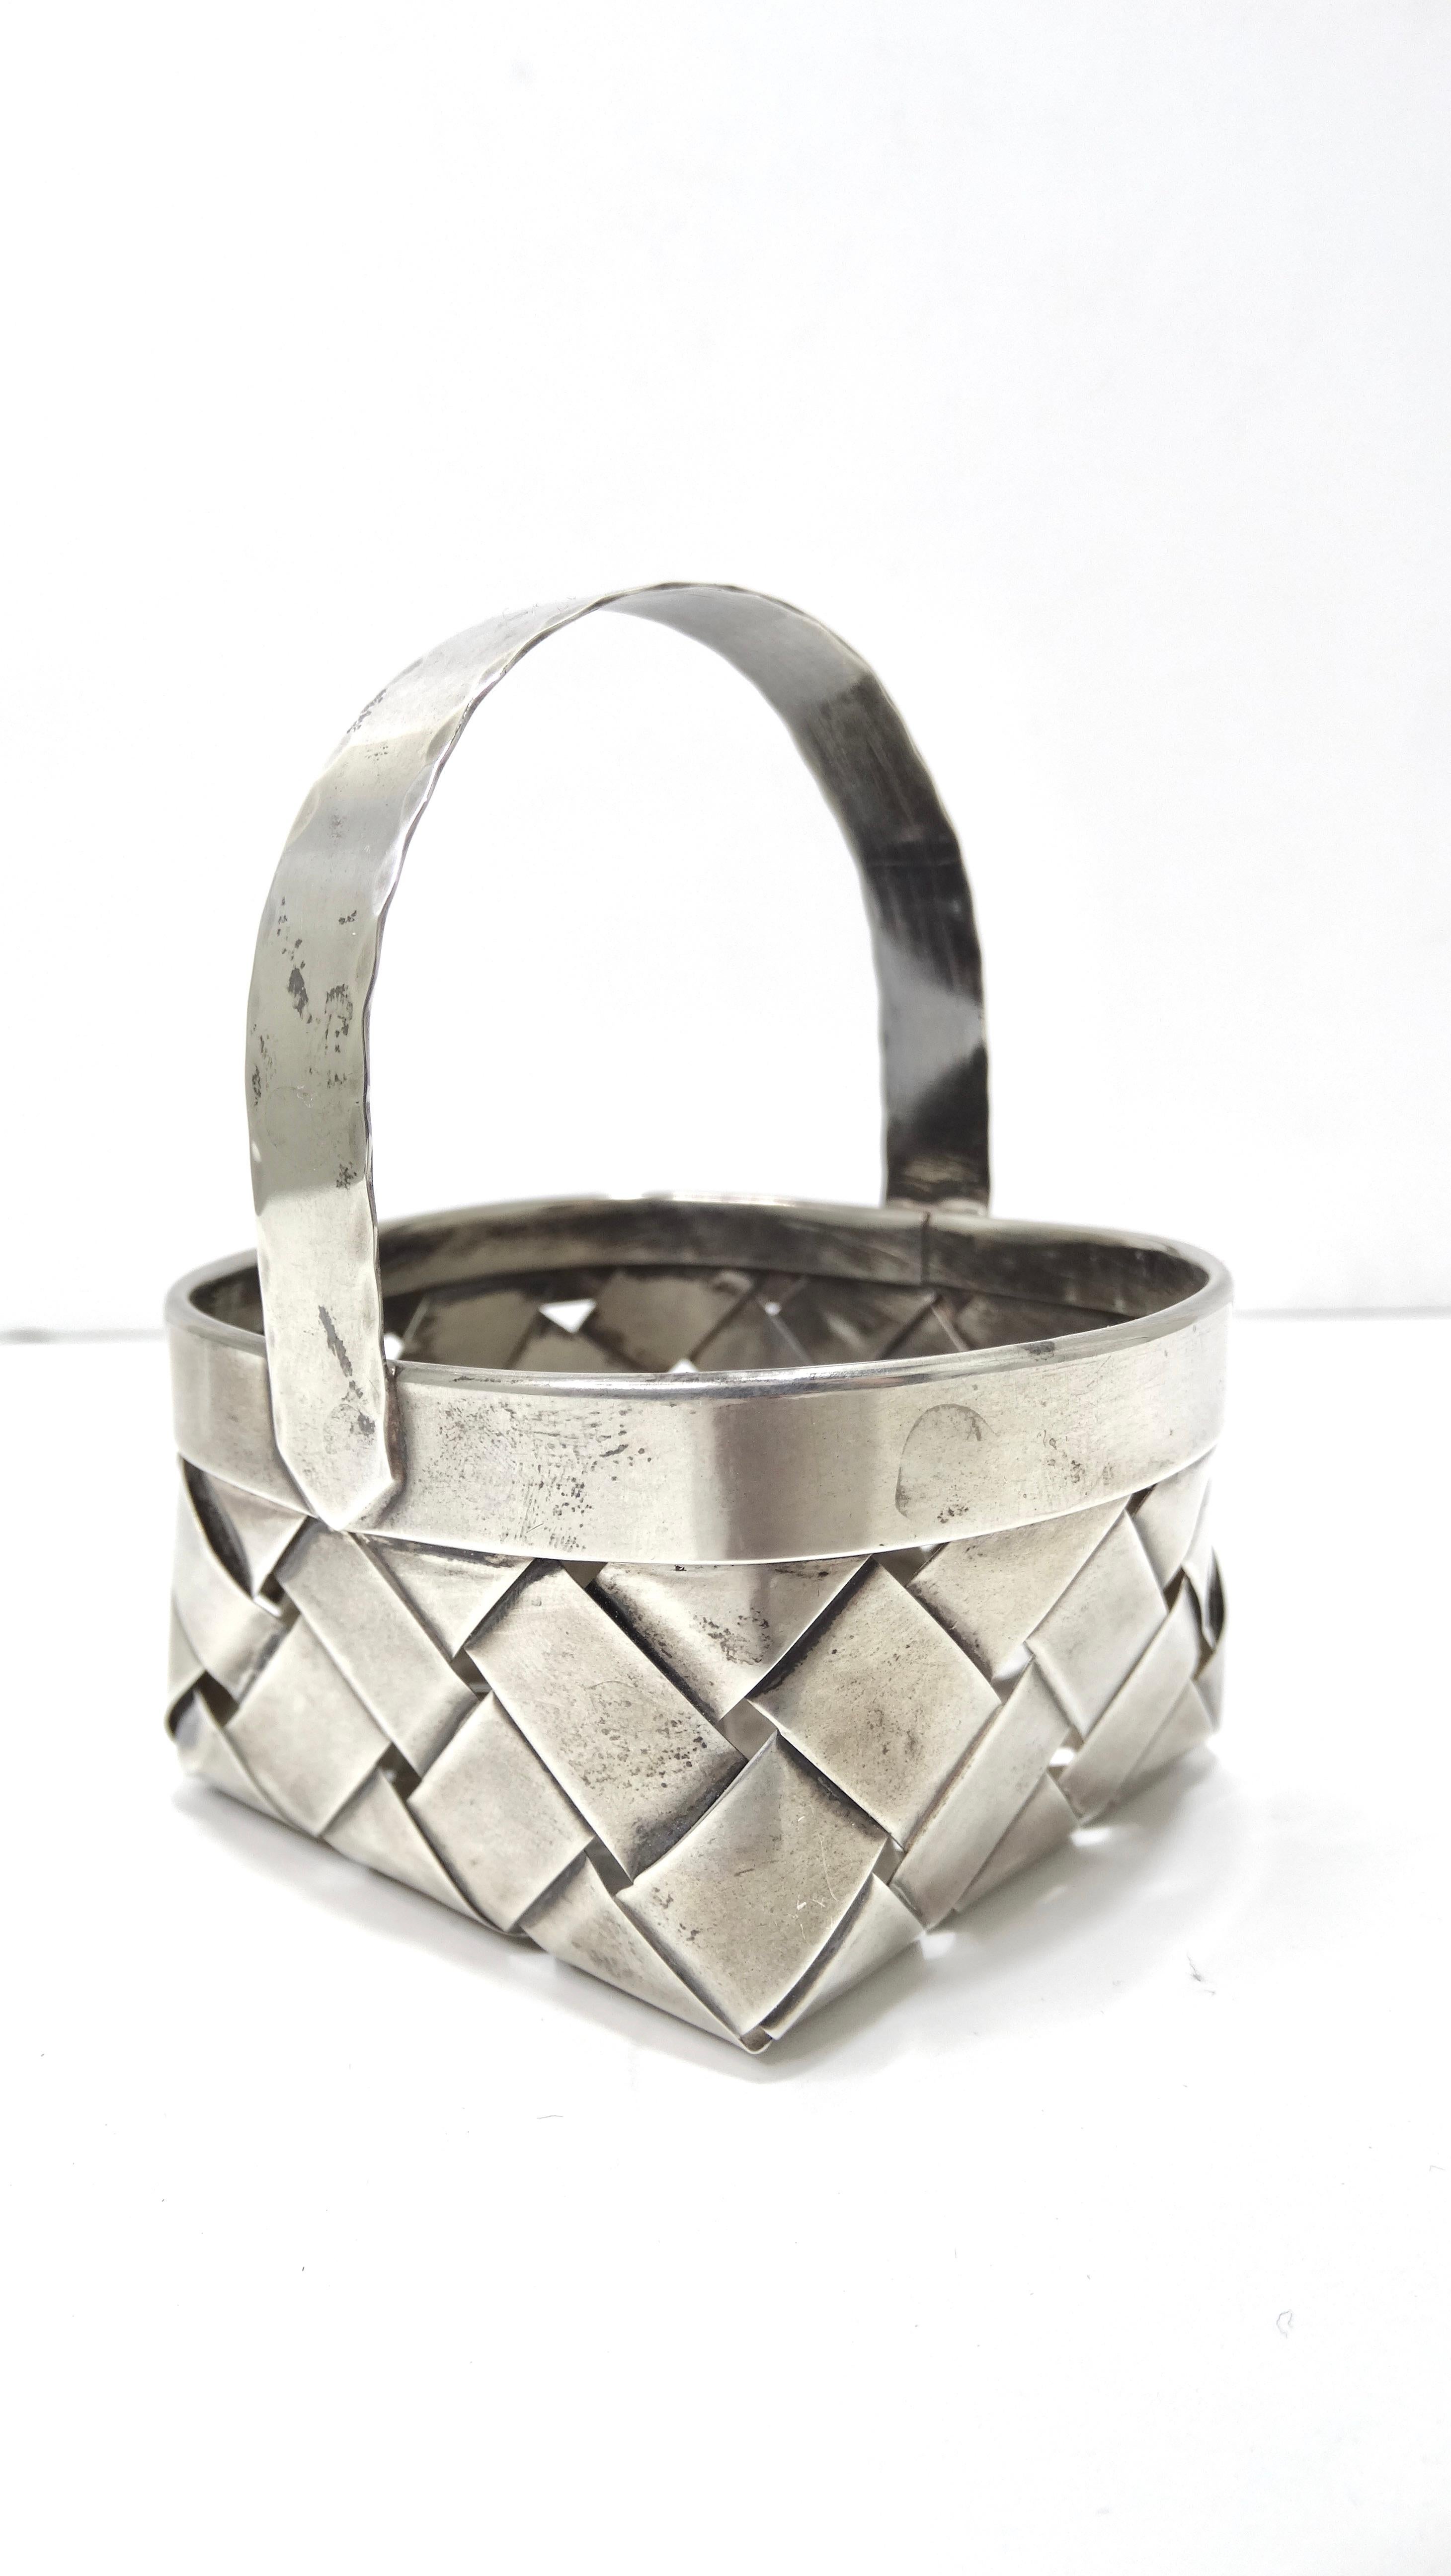 Vintage Cartier Handmade Sterling Silver Small Woven Basket with Handle In Fair Condition For Sale In Scottsdale, AZ